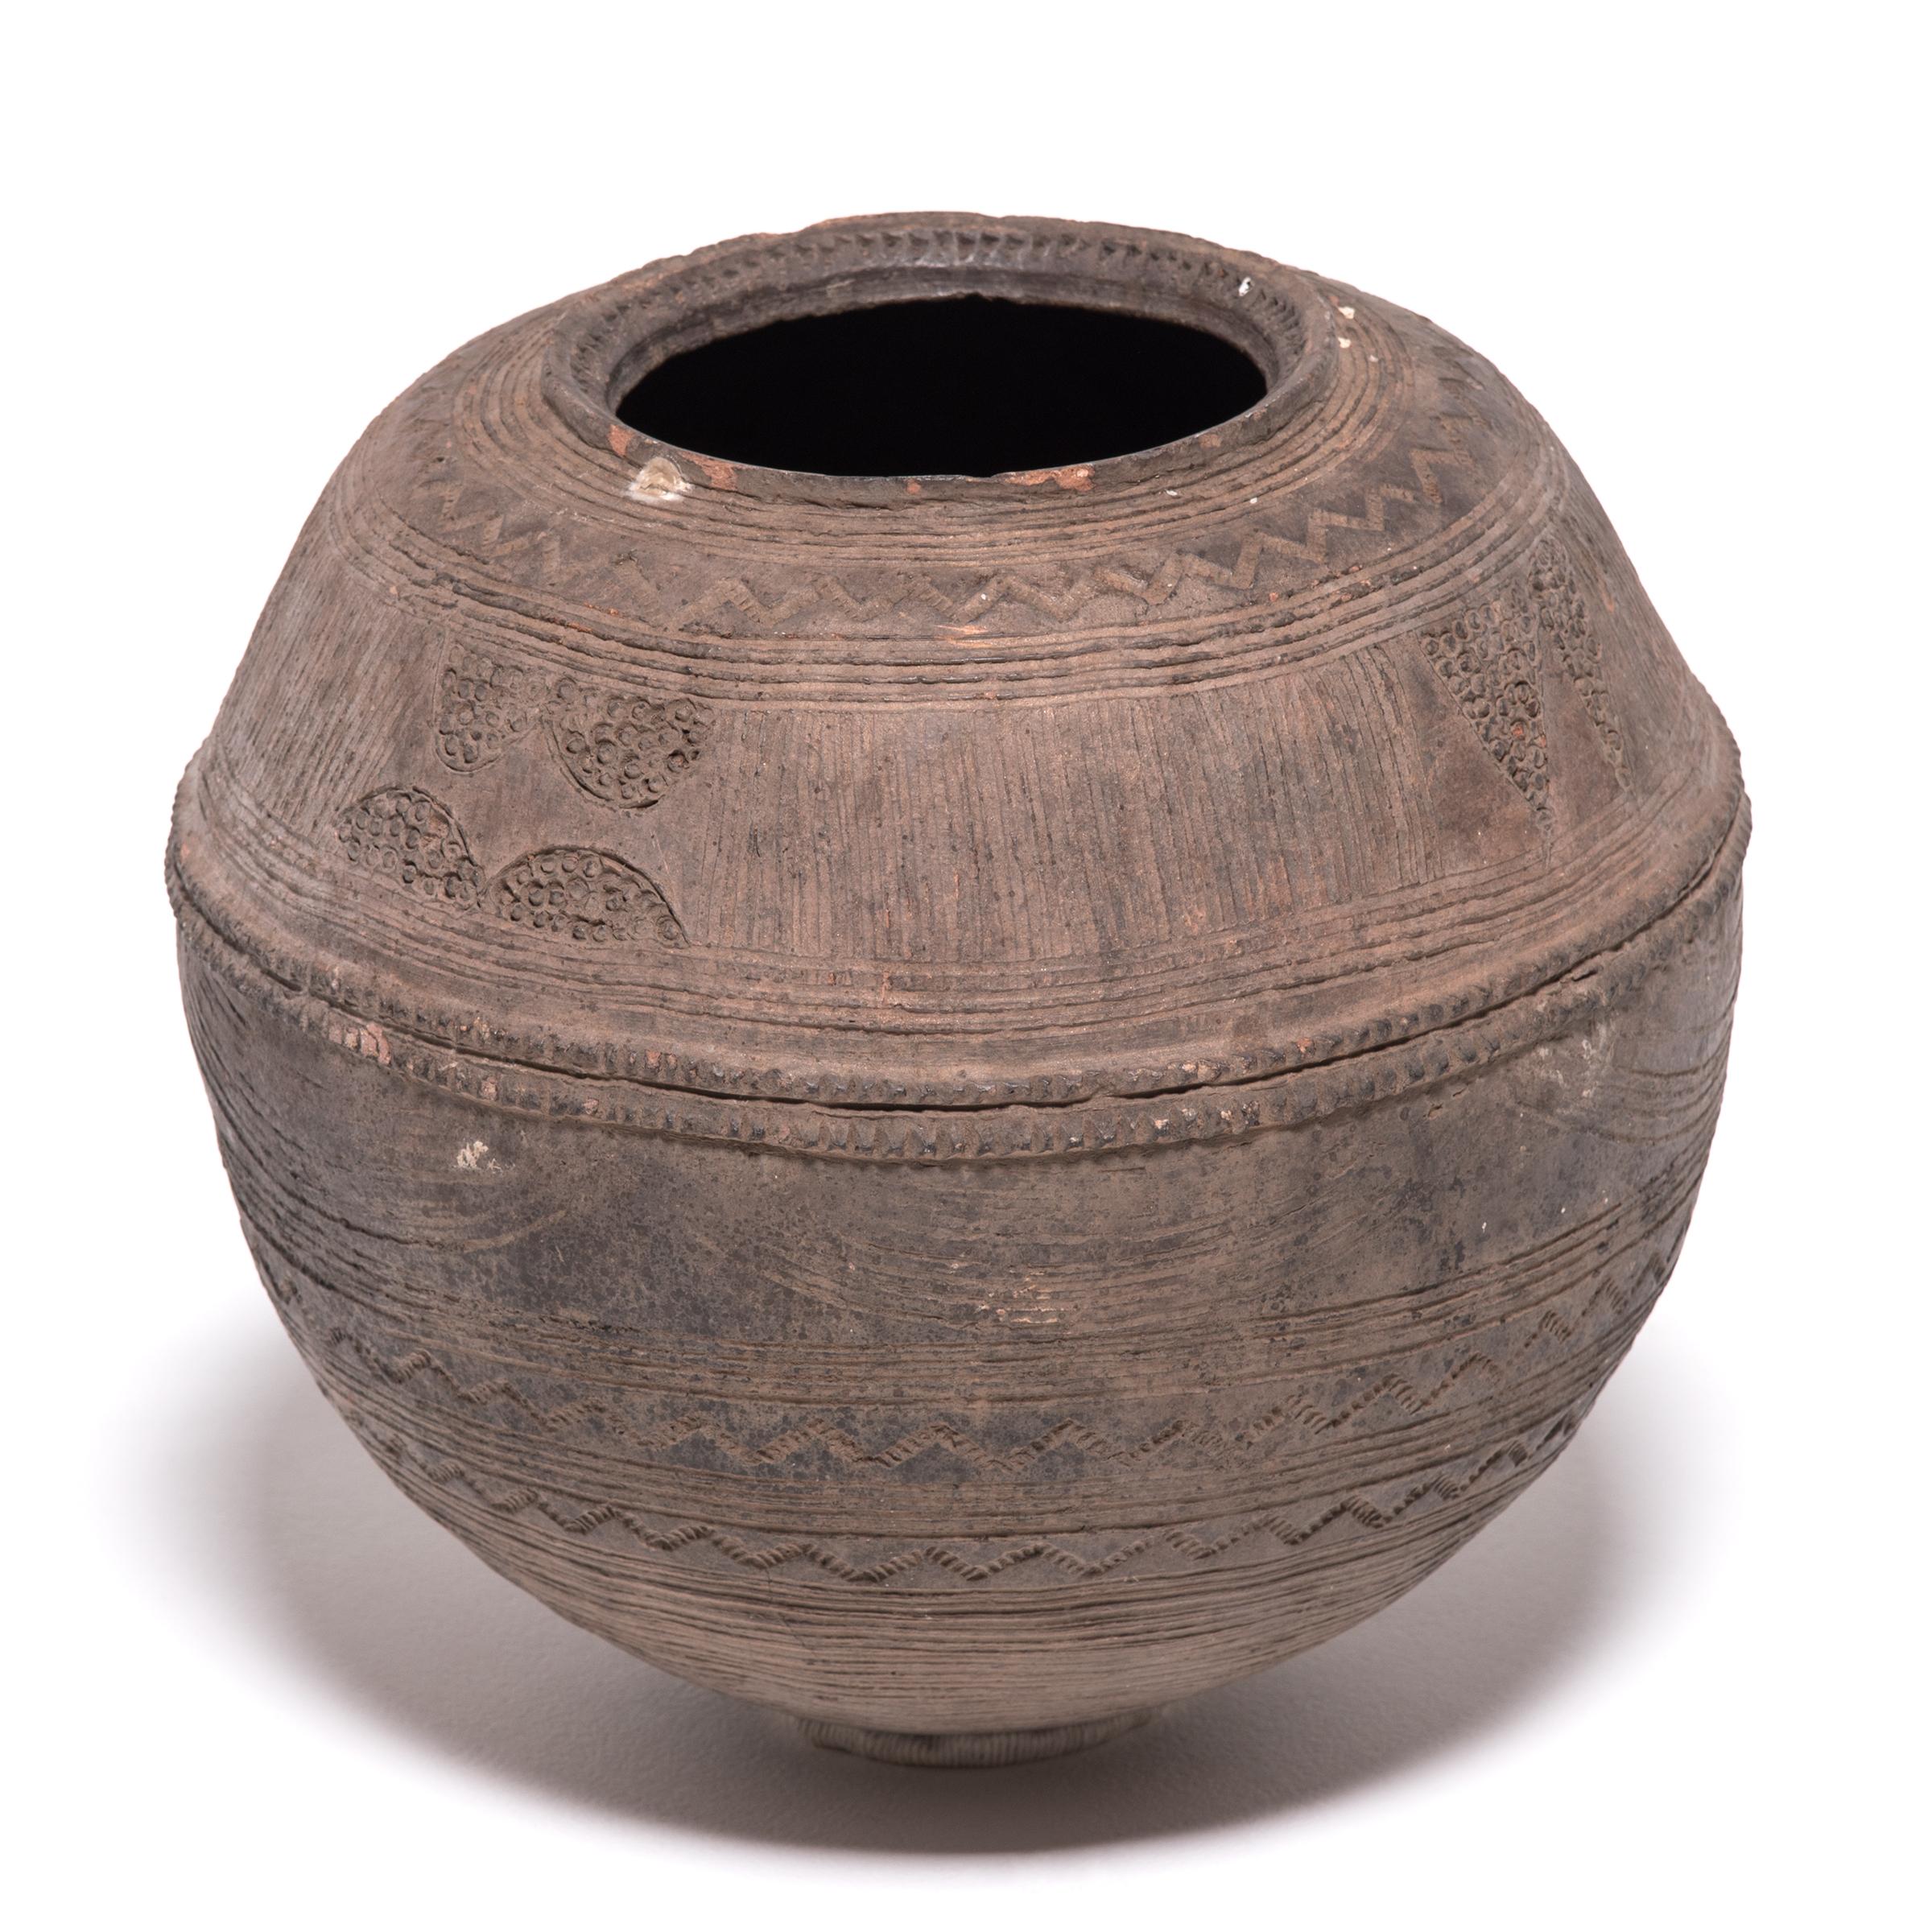 The Nupe people of Nigeria were touted as some of the finest ceramicists in Africa. Everyday objects, like this water vessel, received detailed attention. The vessel's varied textures come from its utilitarian design. The patterns and bands were